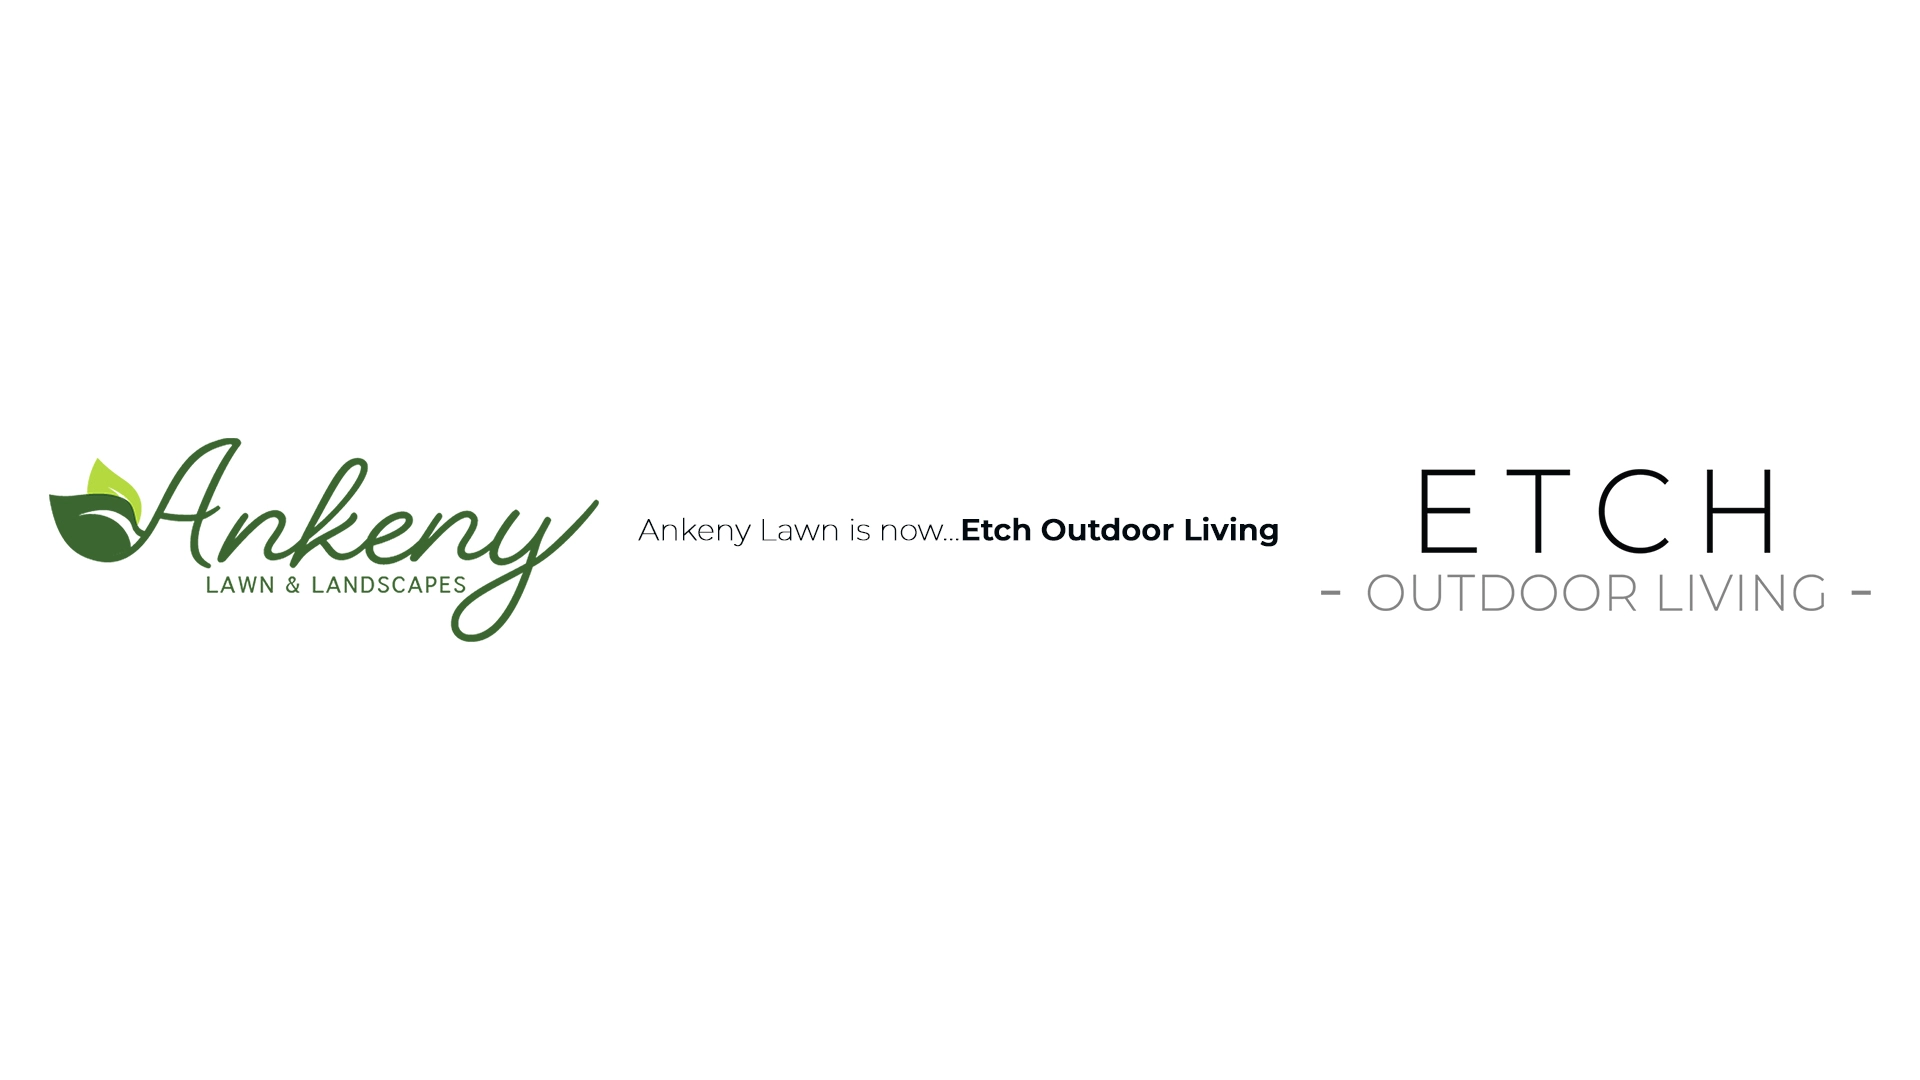 Ankeny Lawn & Landscapes Is Now ETCH Outdoor Living!